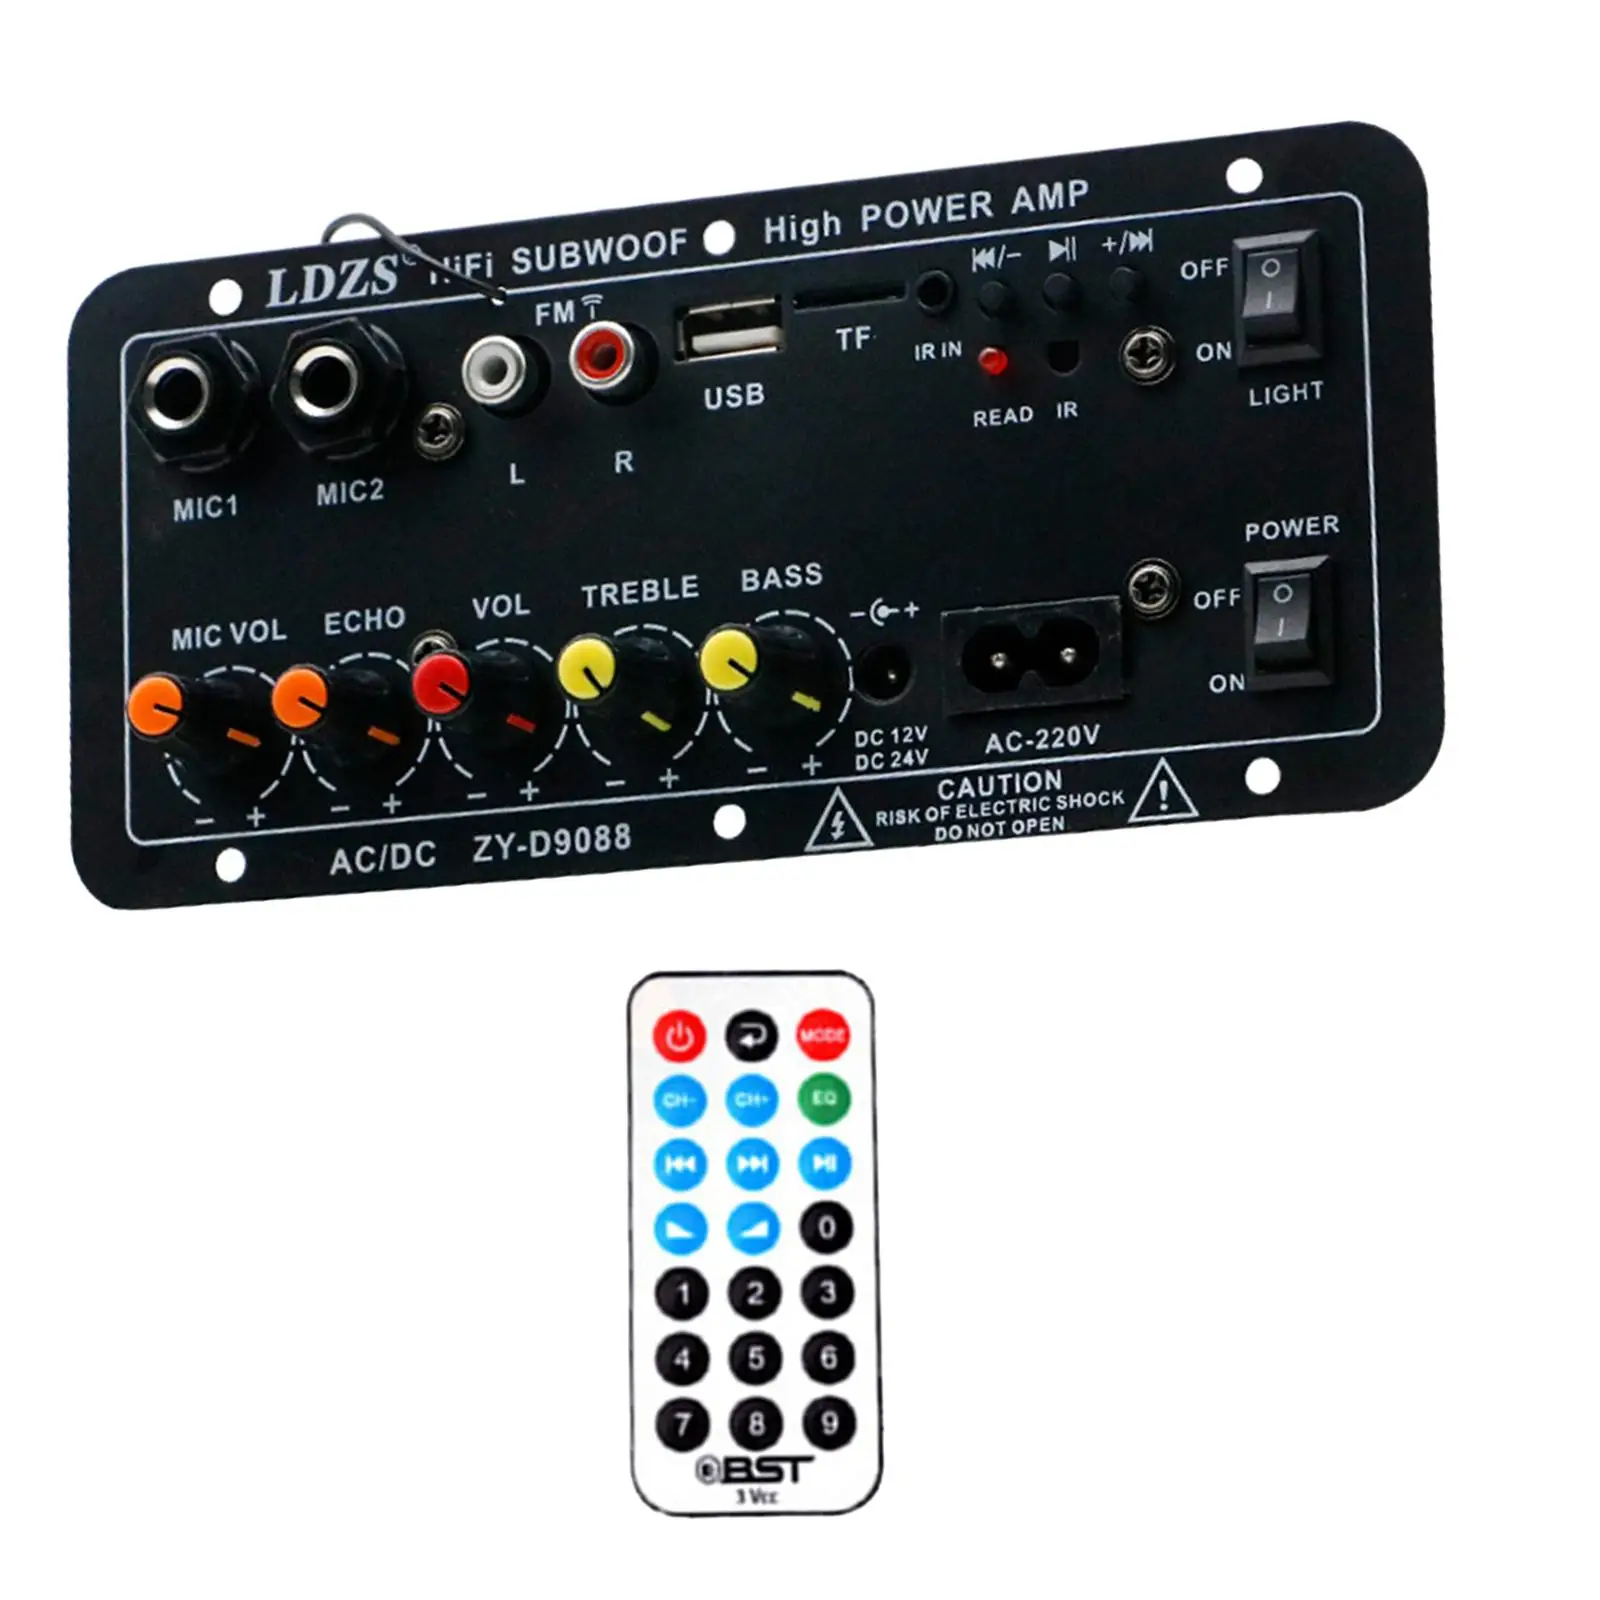 Microphone Karaoke Power Amplifier Board High Performance Professional Audio Mixer for KTV Motorcycles Smartphones PC Cars